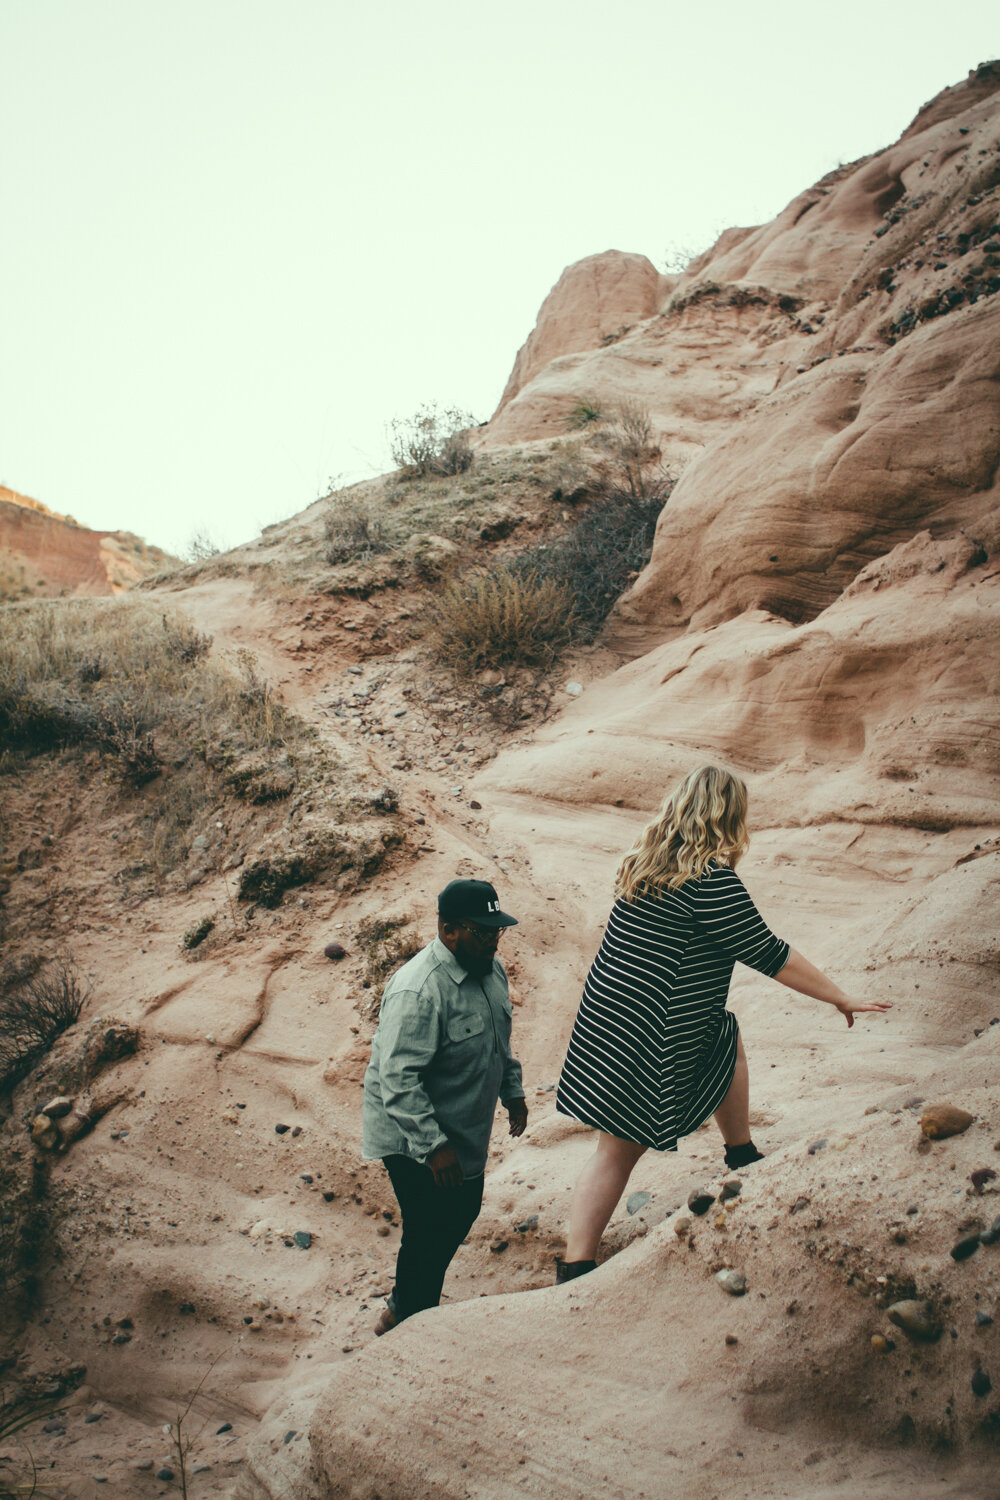 engagement engaged photography photographe marriage wedding photographer corse corsica california desert foothill ranch whiting lifestyle Anza Creative-17.jpg